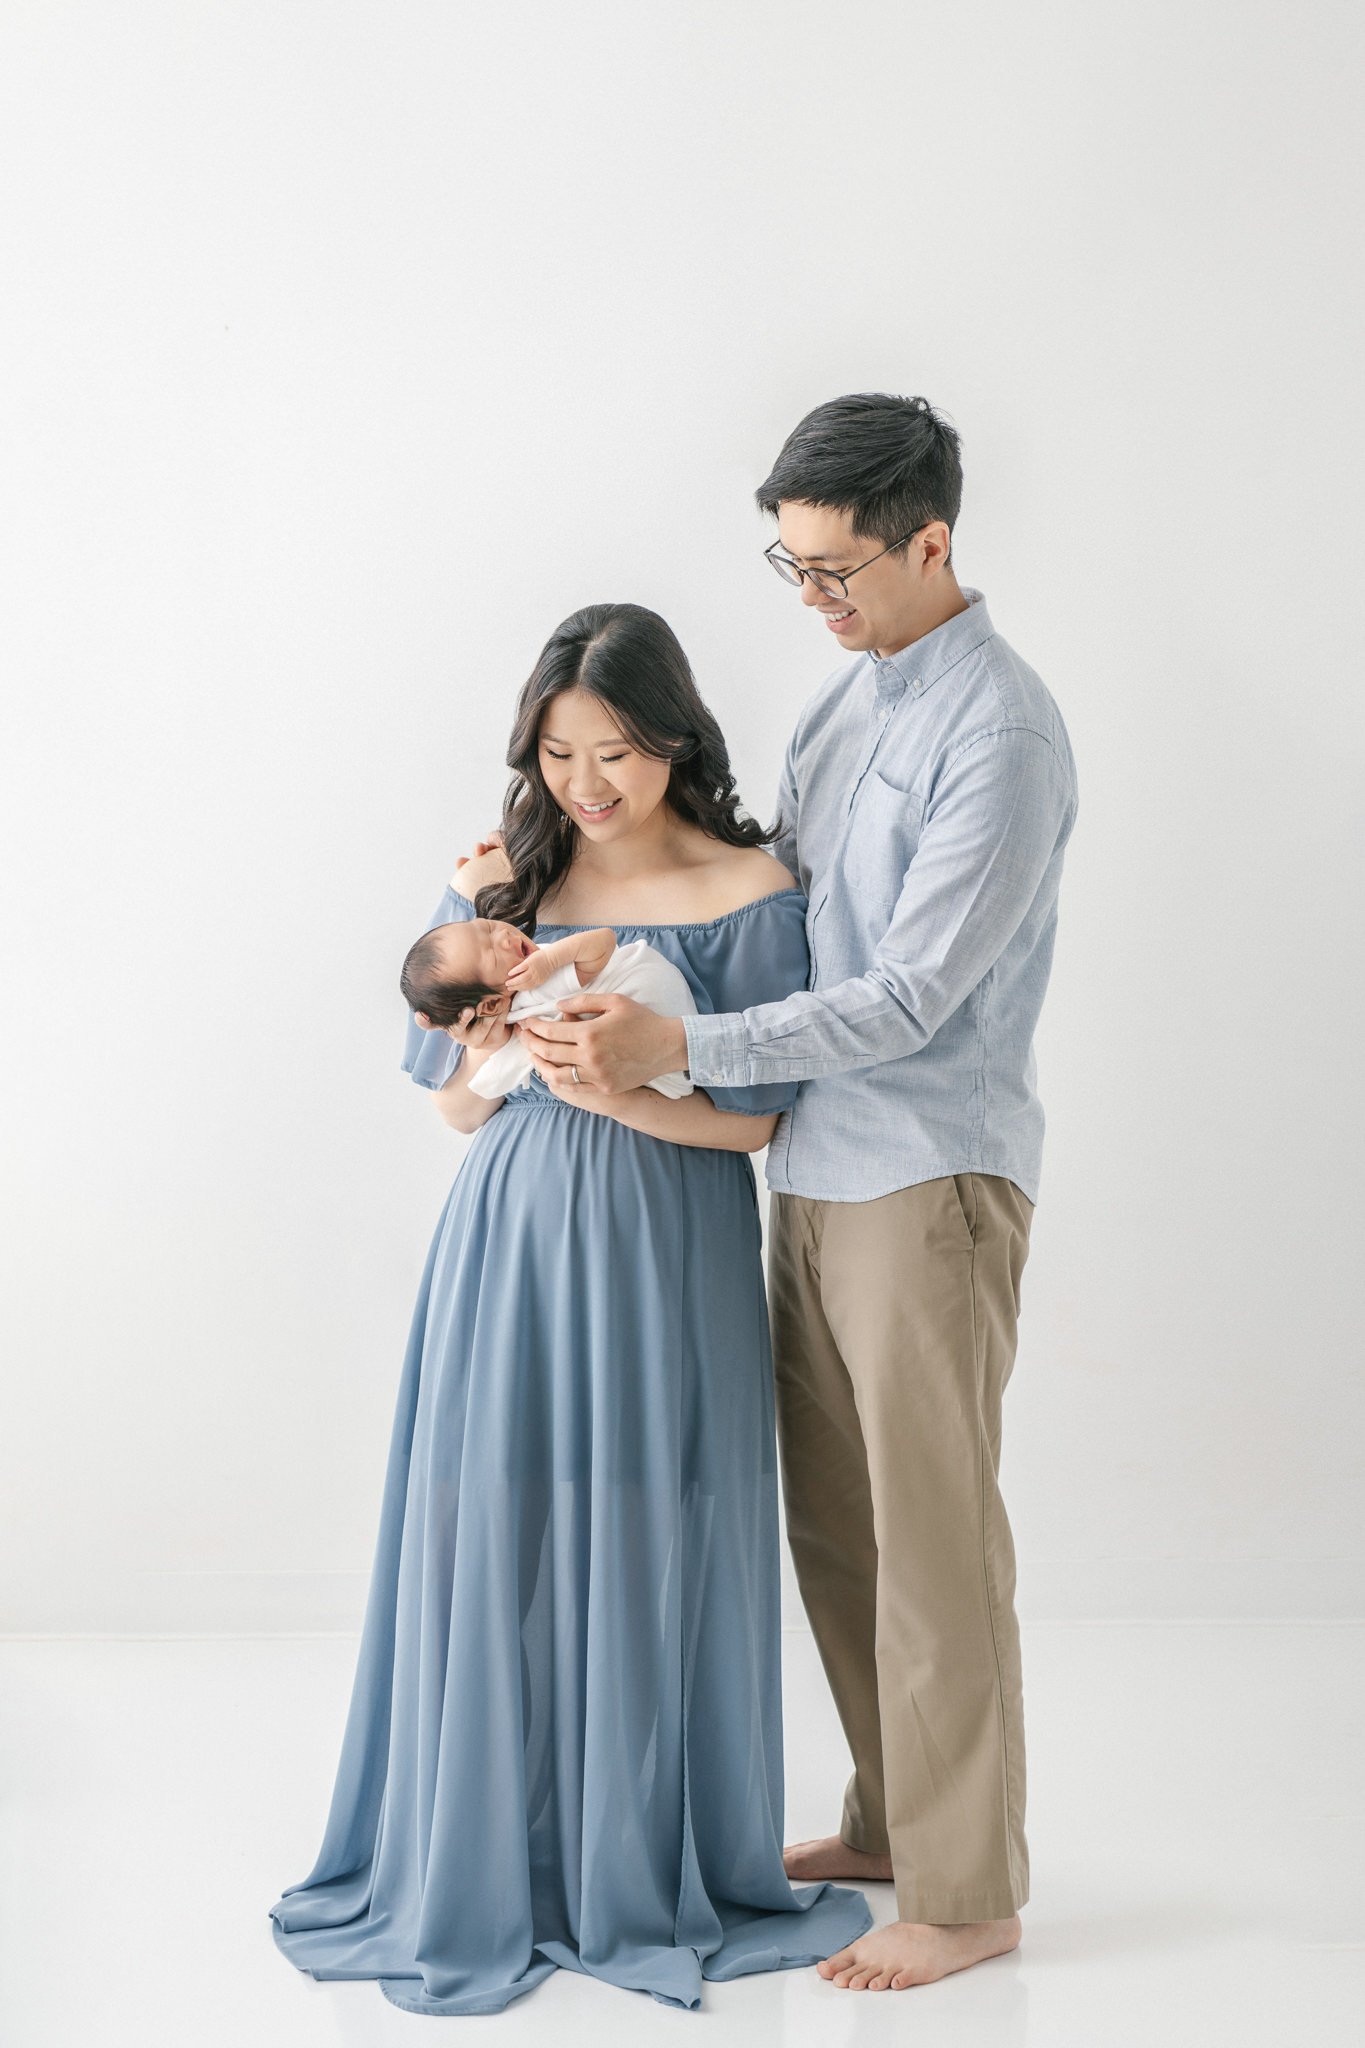  A mother and father look lovingly down at their newborn baby boy by Nicole Hawkins Photography. family portrait studio family New Jersey high-end #NicoleHawkinsPhotography #NicoleHawkinsNewborns #Babyboy #studionewbornsNJ #studionewbonportraits #NYn